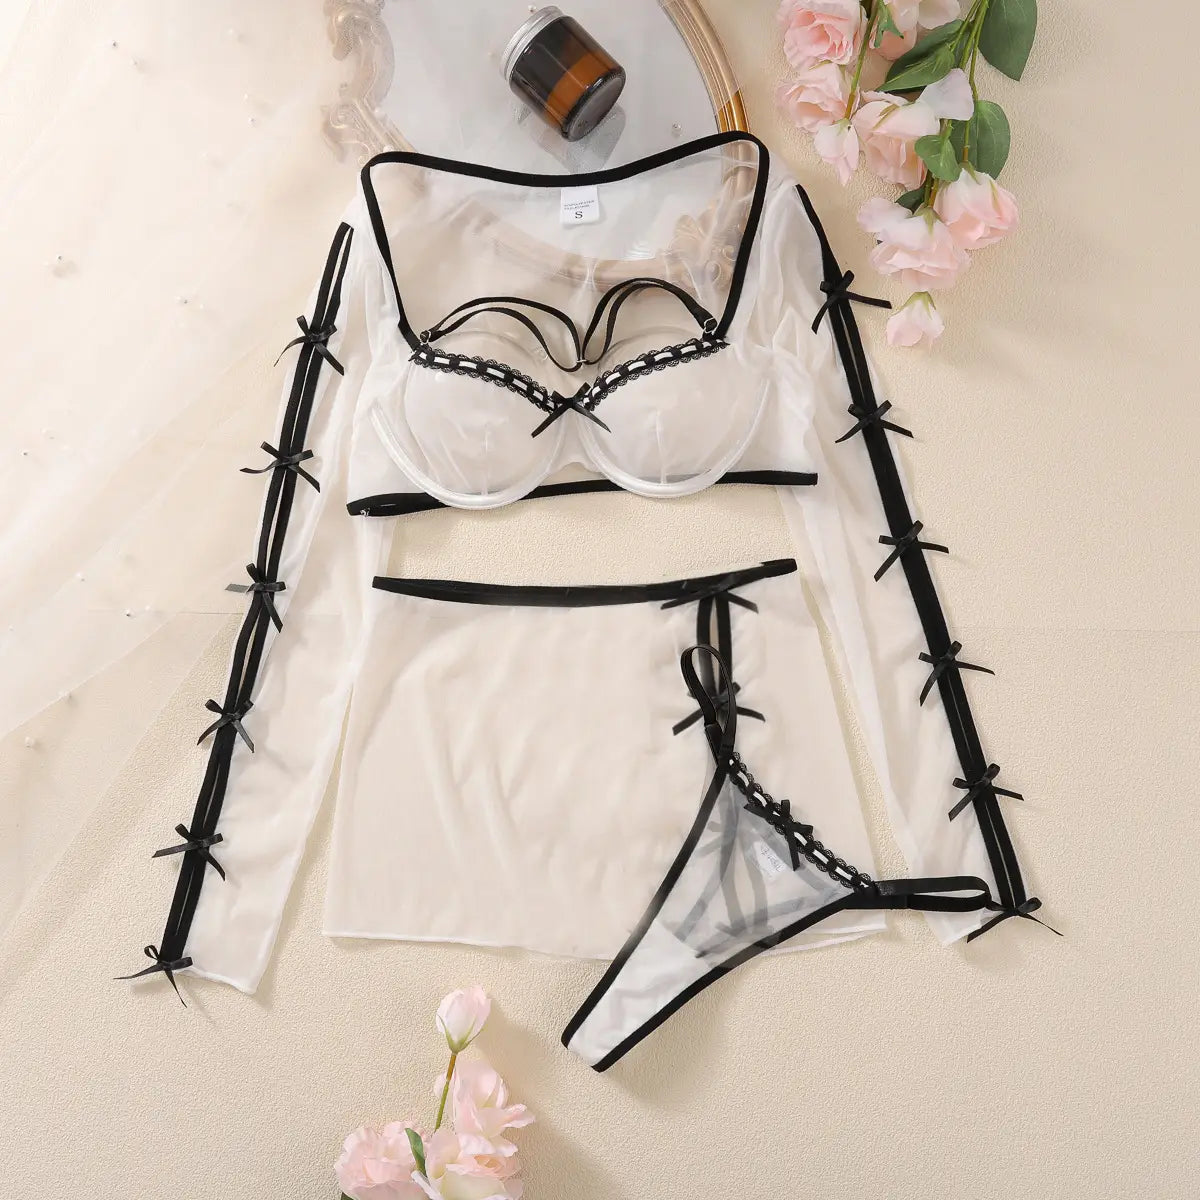 Sexy Mesh Lace-up Lingerie Set – Alluring Three-piece